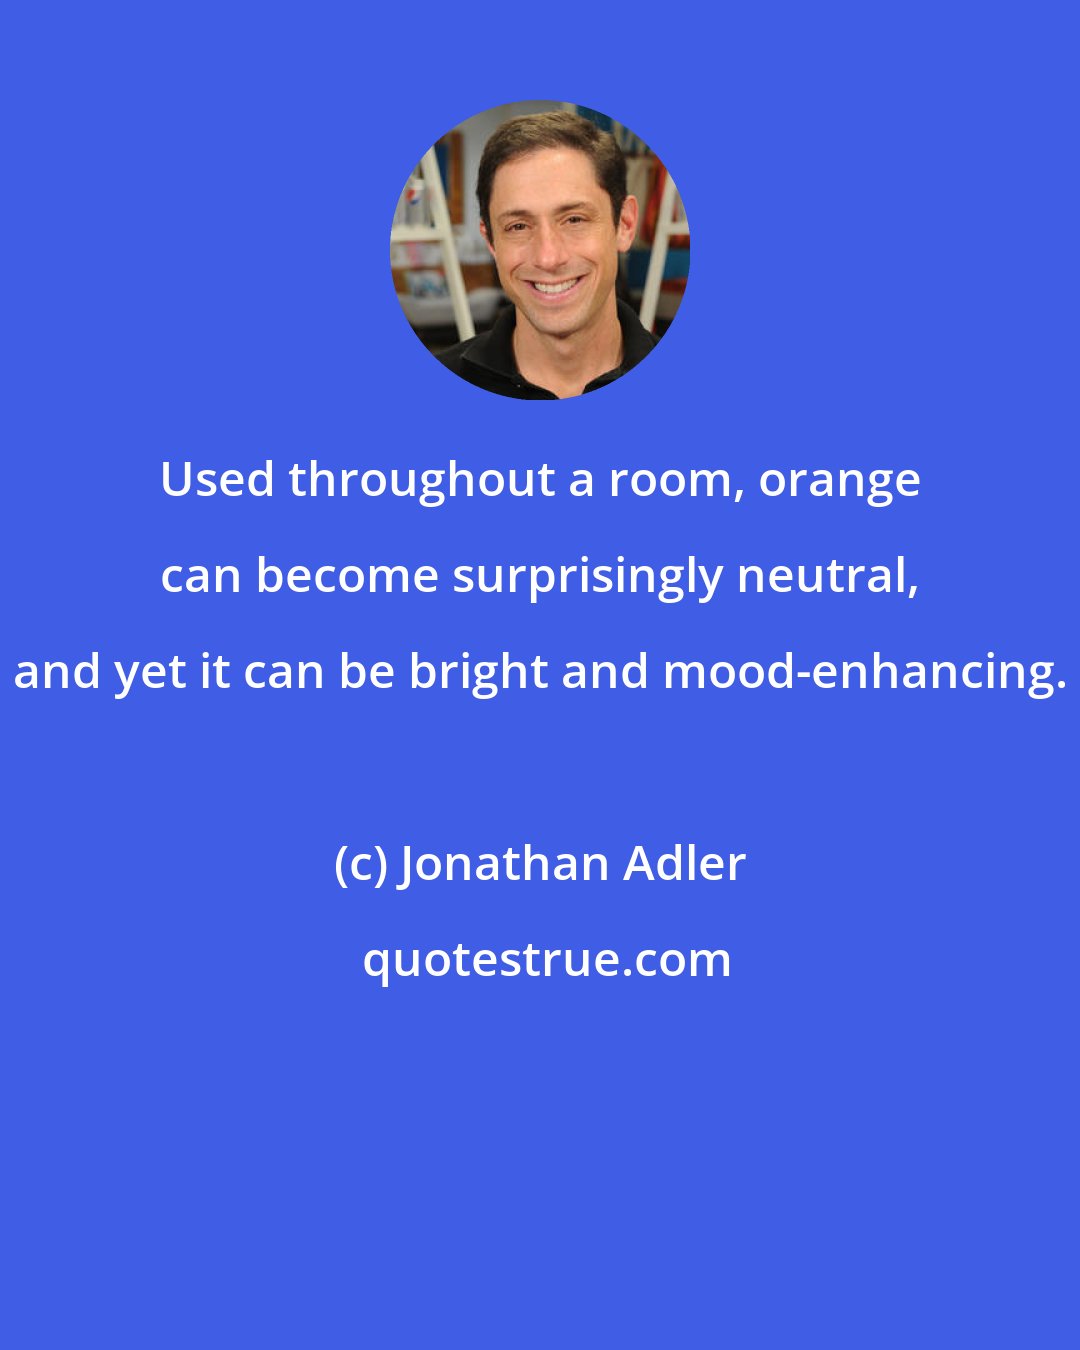 Jonathan Adler: Used throughout a room, orange can become surprisingly neutral, and yet it can be bright and mood-enhancing.